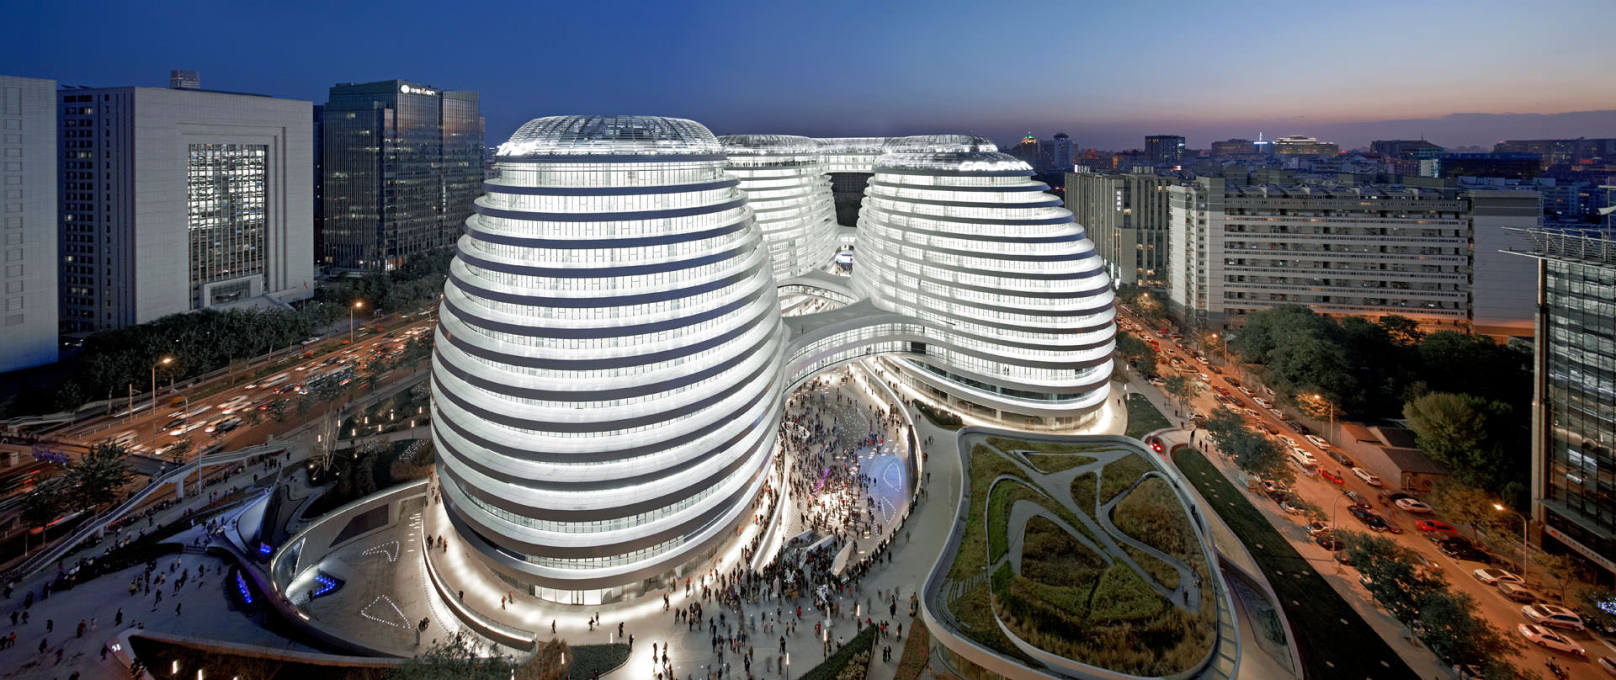 The lights are on but no one&rsquo;s home. The Galaxy Soho looking more CGI than... (Photo: Hufton + Crow)